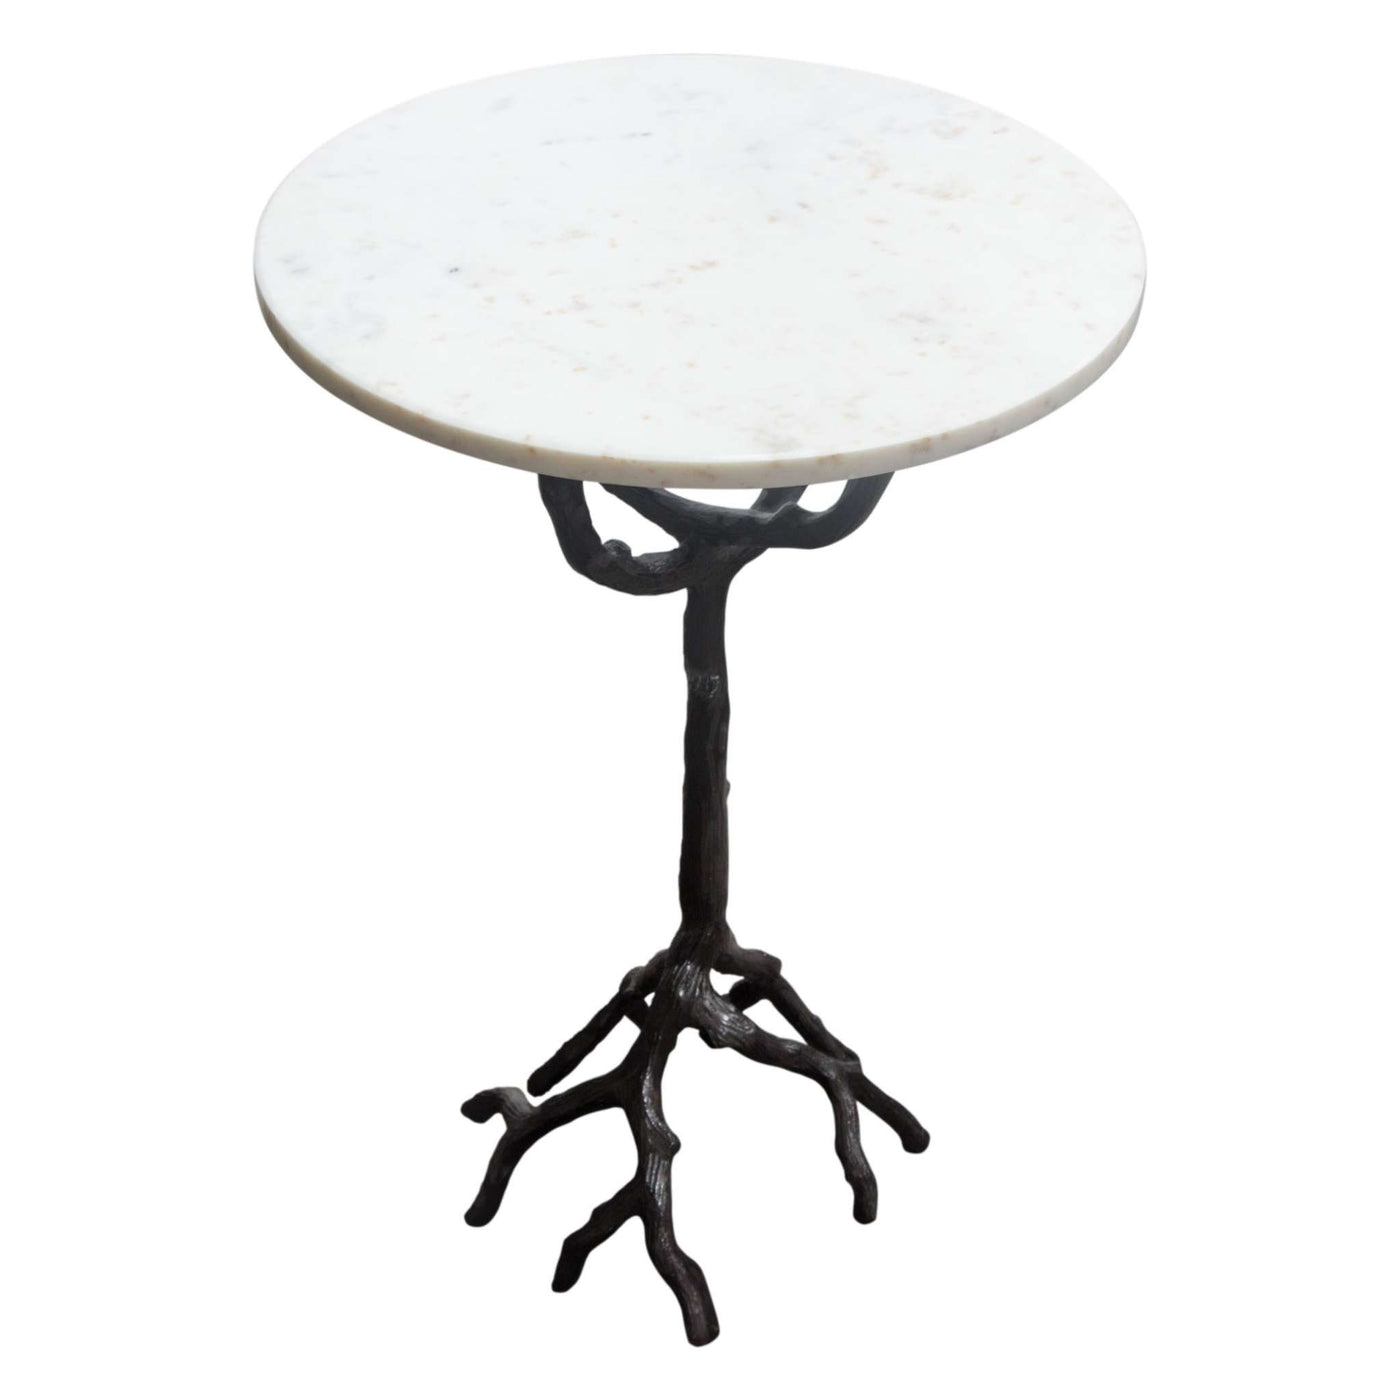 Birch Round Accent Table w/ Black Casted Aluminum Base & White Marble Top by Diamond Sofa